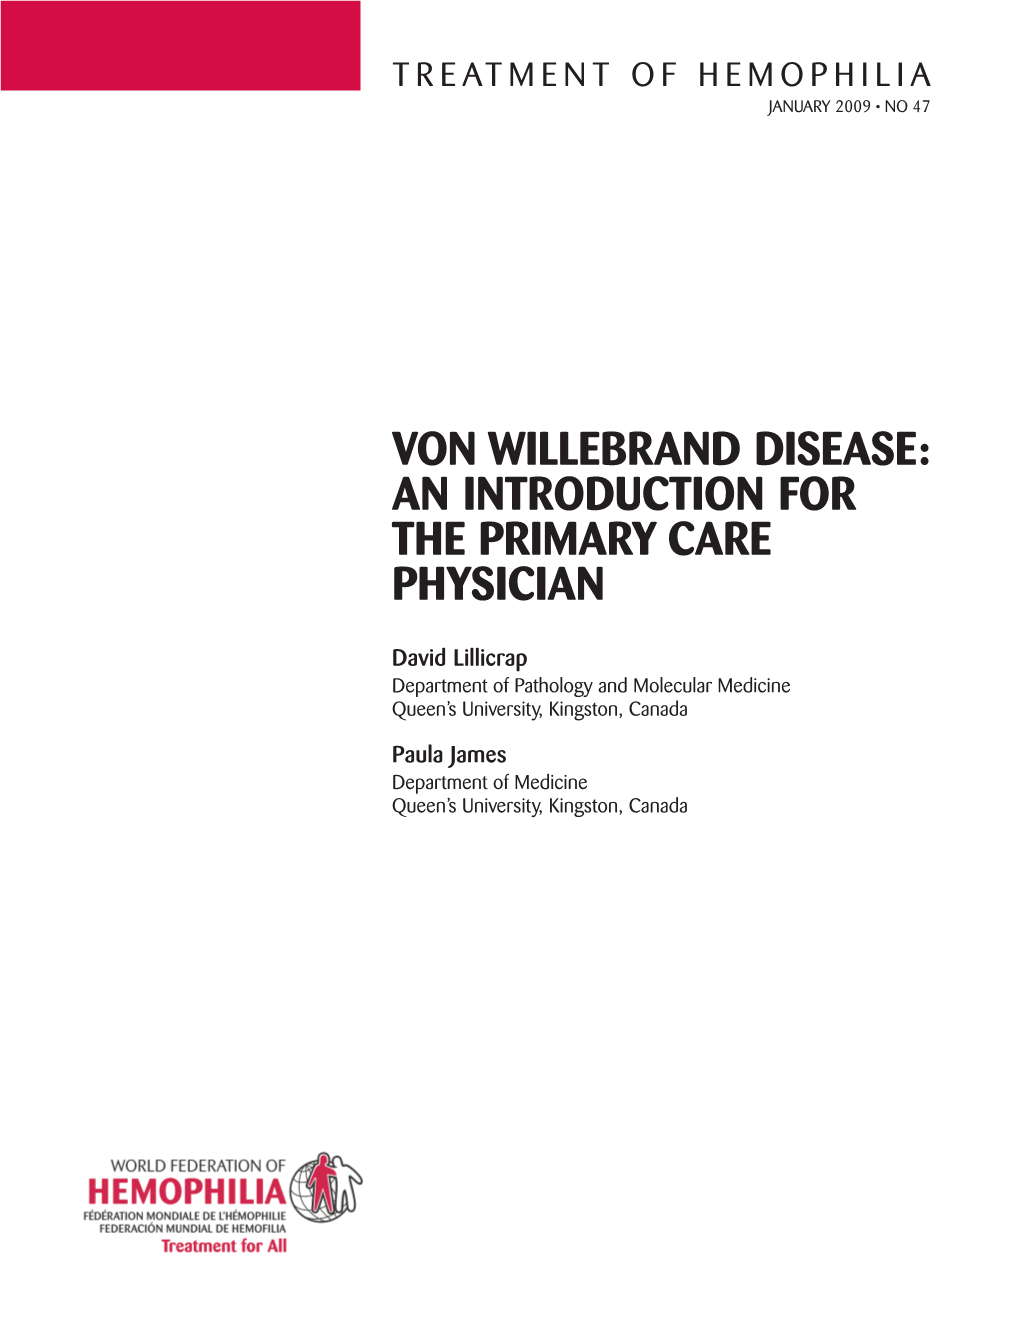 Von Willebrand Disease: an Introduction for the Primary Care Physician